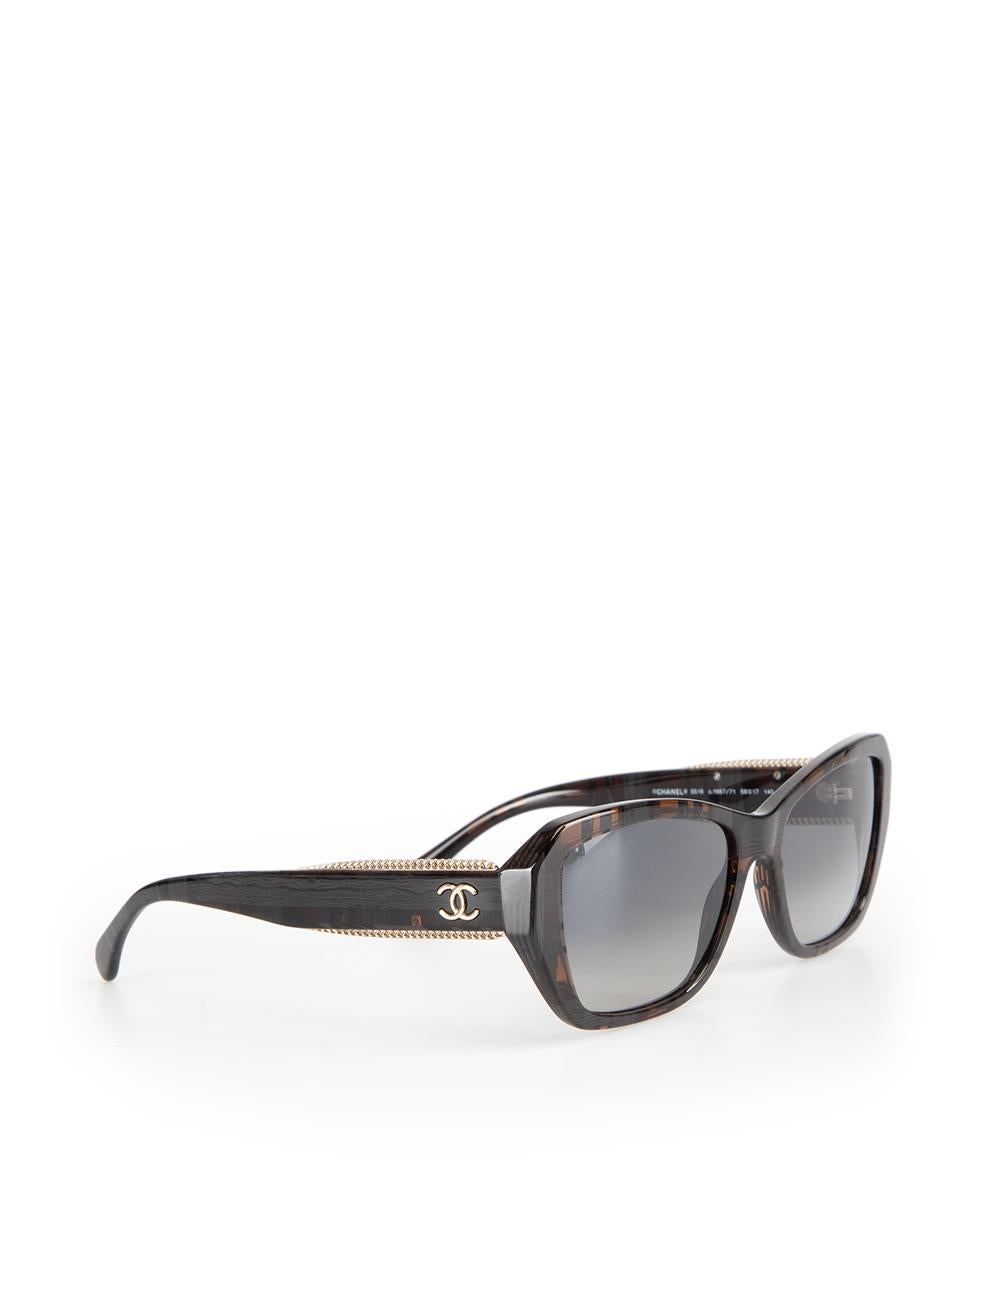 Chanel Black Butterfly Grey Gradient Sunglasses In New Condition For Sale In London, GB